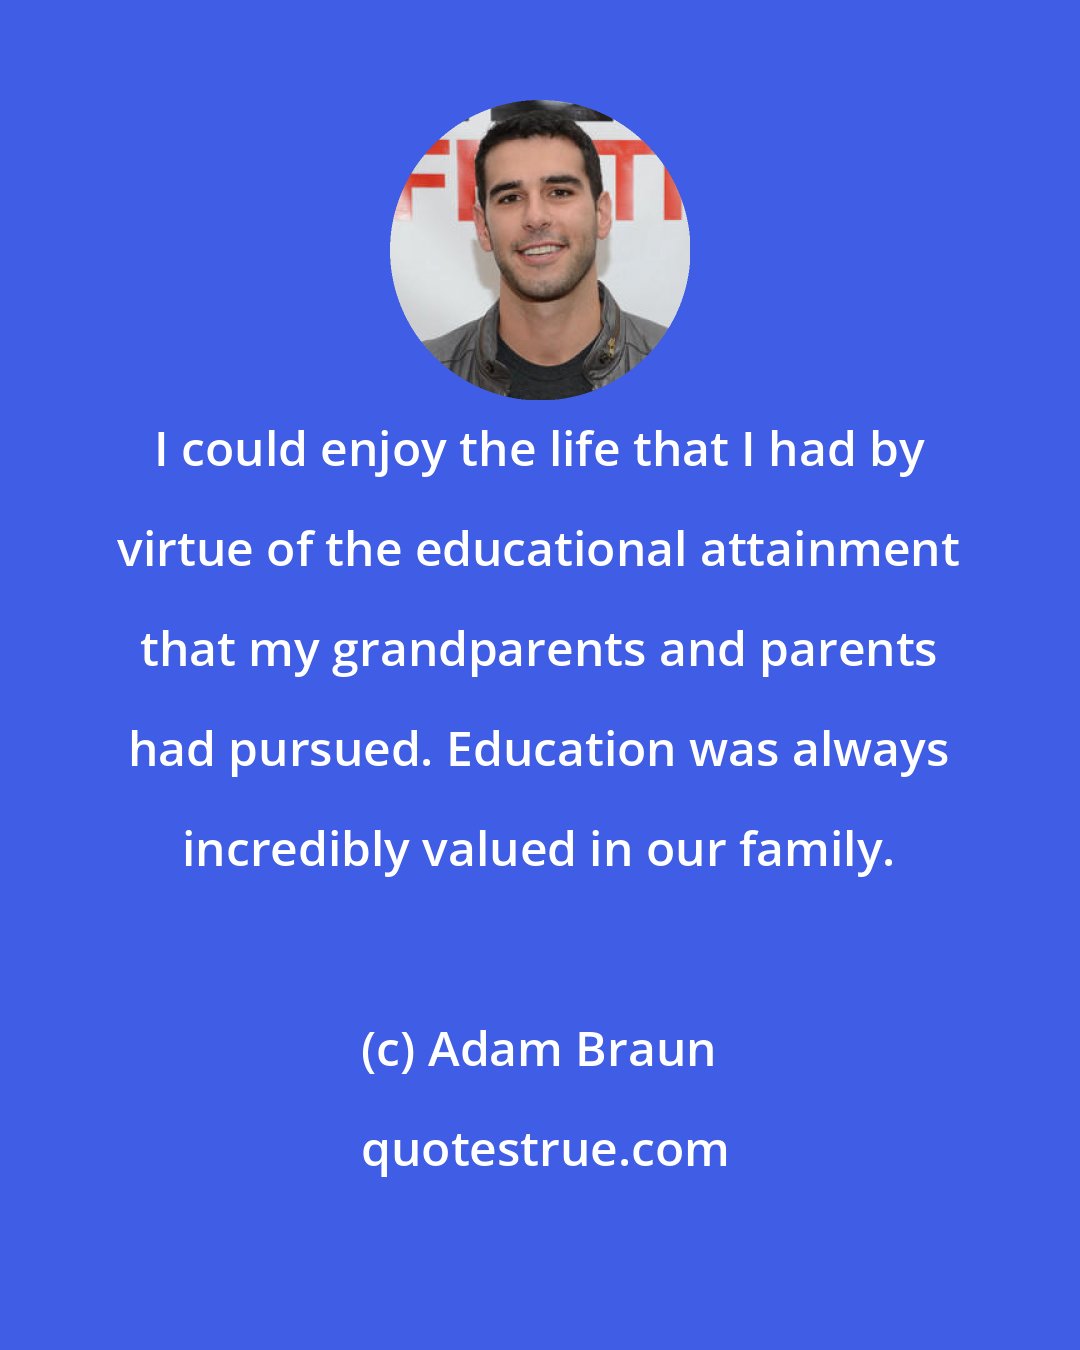 Adam Braun: I could enjoy the life that I had by virtue of the educational attainment that my grandparents and parents had pursued. Education was always incredibly valued in our family.